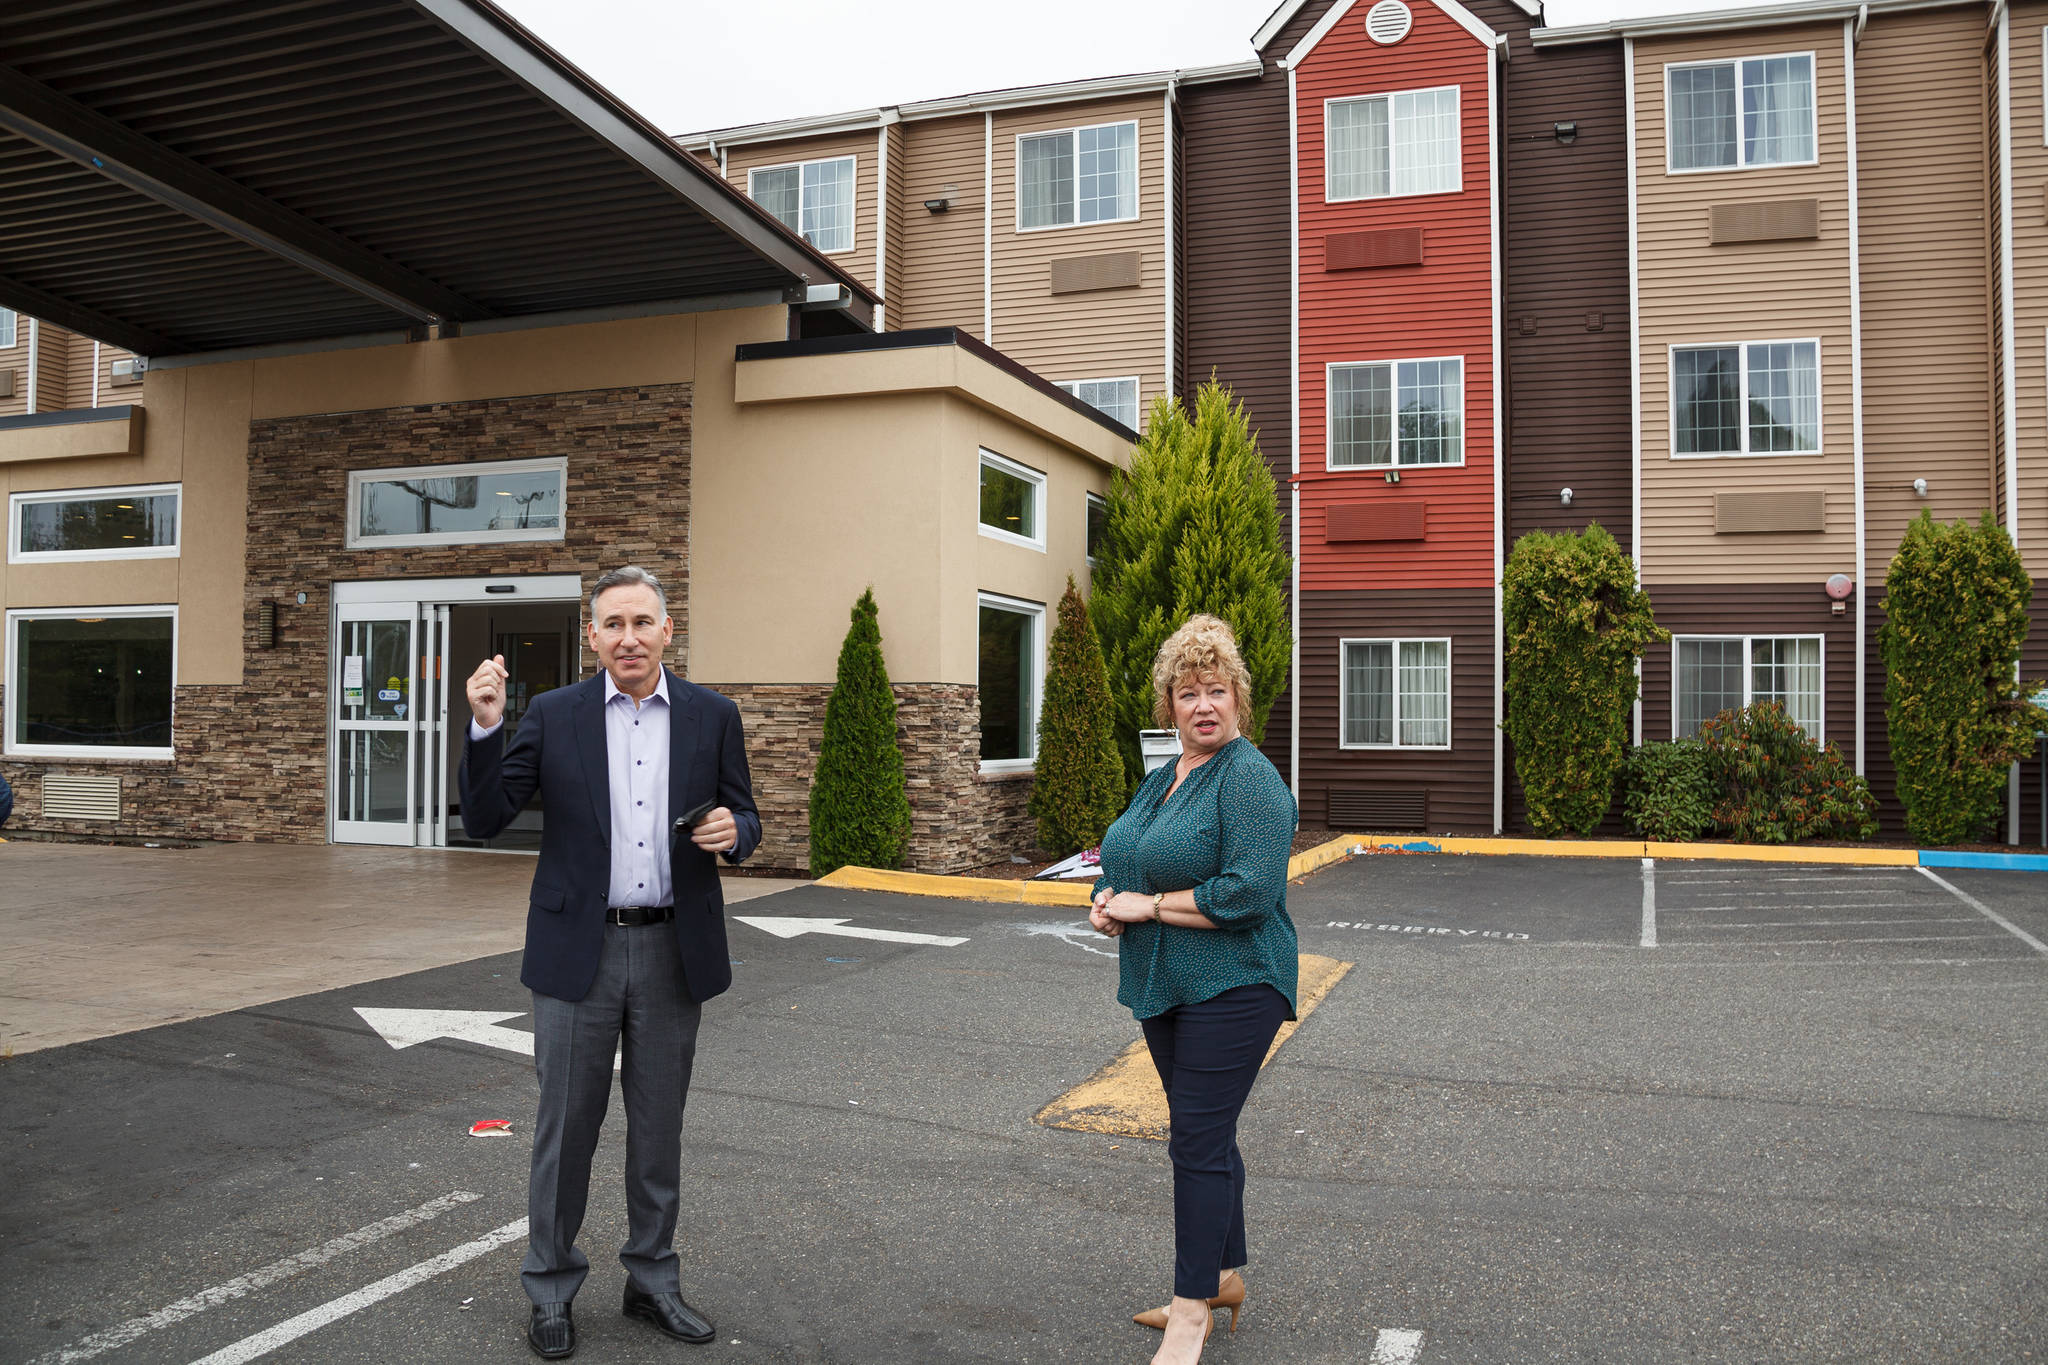 King County Executive Dow Constantine and Auburn Mayor Nancy Backus stand in front of the Clarion Hotel in Auburn on Tuesday July 20. The hotel will be used to house approximately 100 people experiencing homelessness in the area as part of the county’s Health Through Housing program. Photo by Henry Stewart-Wood.